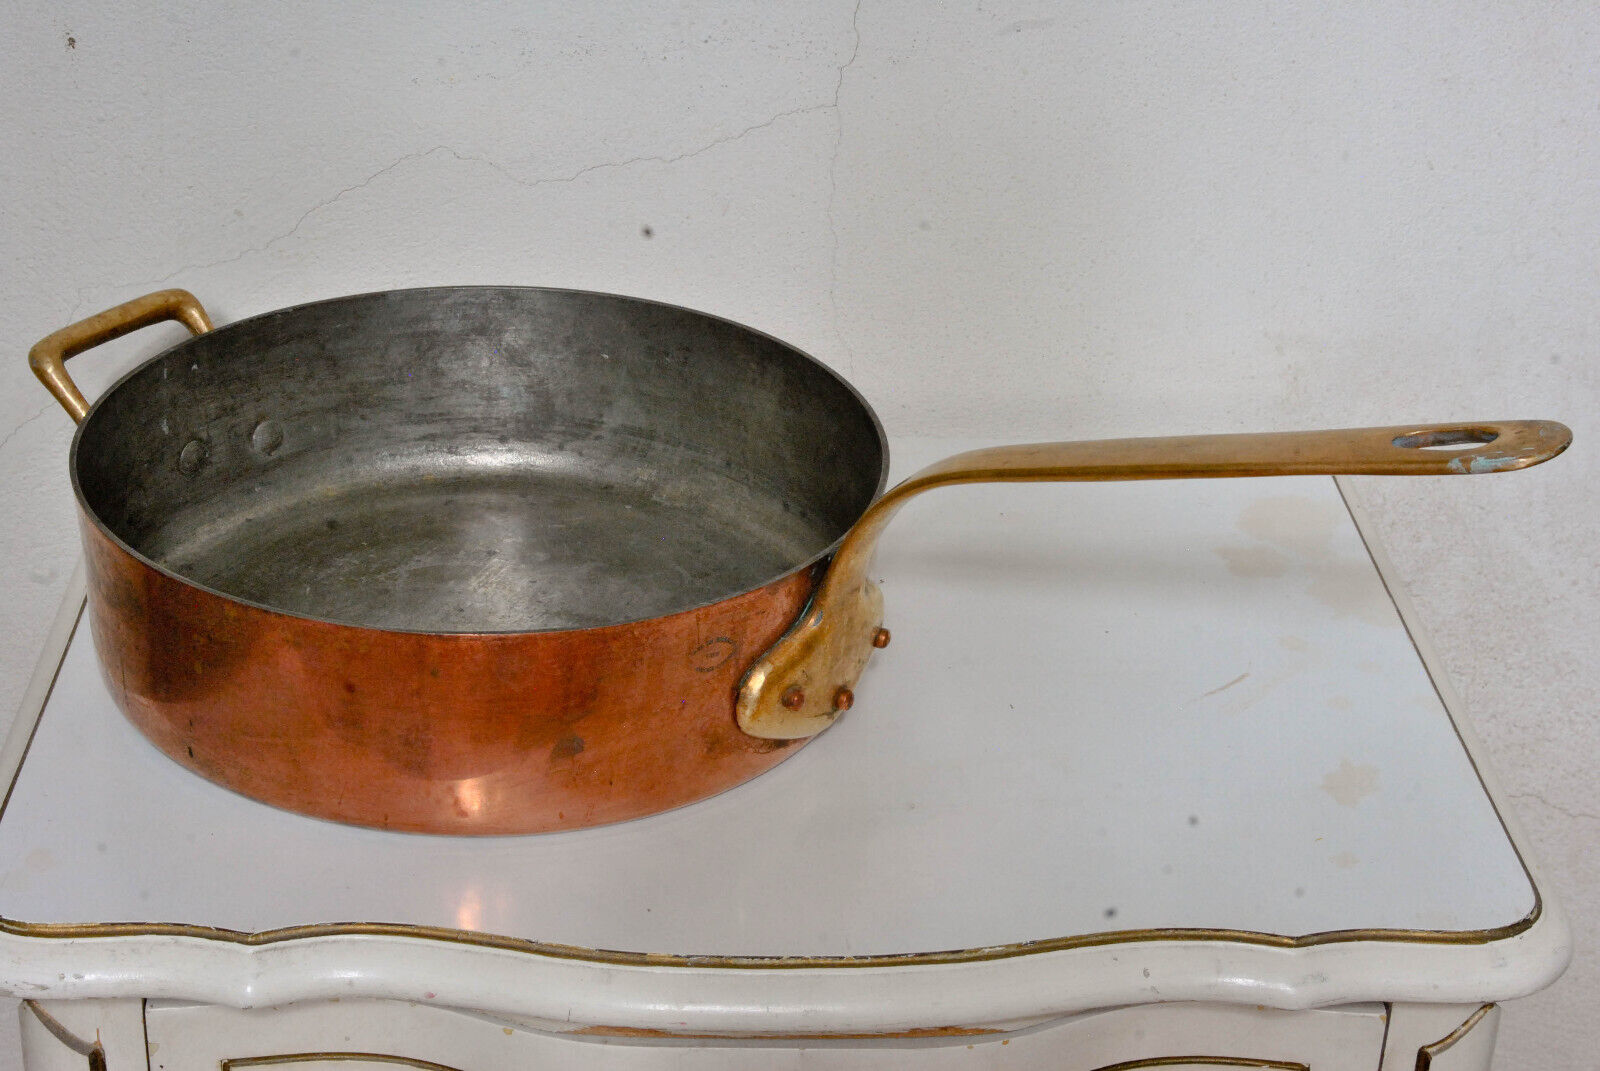 Vintage French copper saute pan skillet 11.4 in  7.6 lbs France large capacity